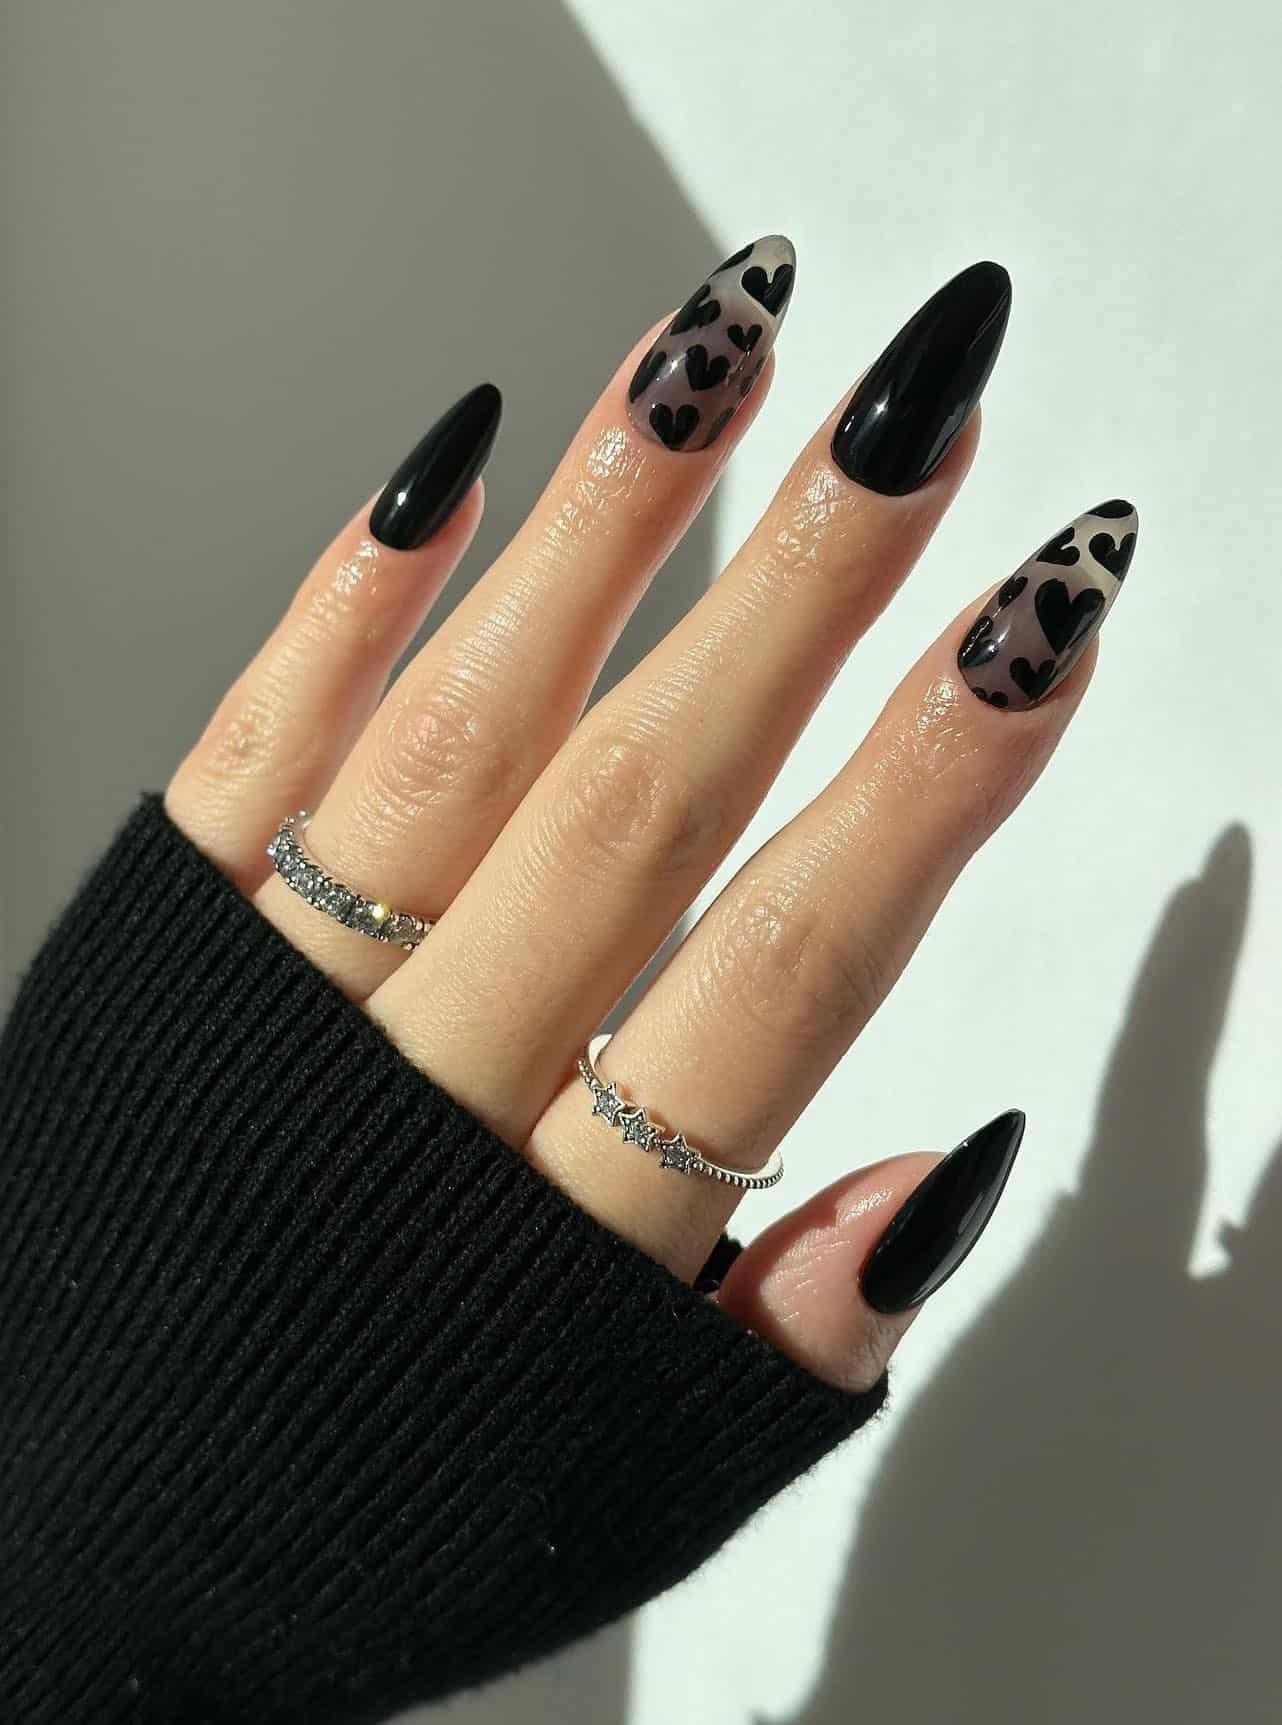 Long almond nails with glossy black polish and sheer black accent nails with heart art